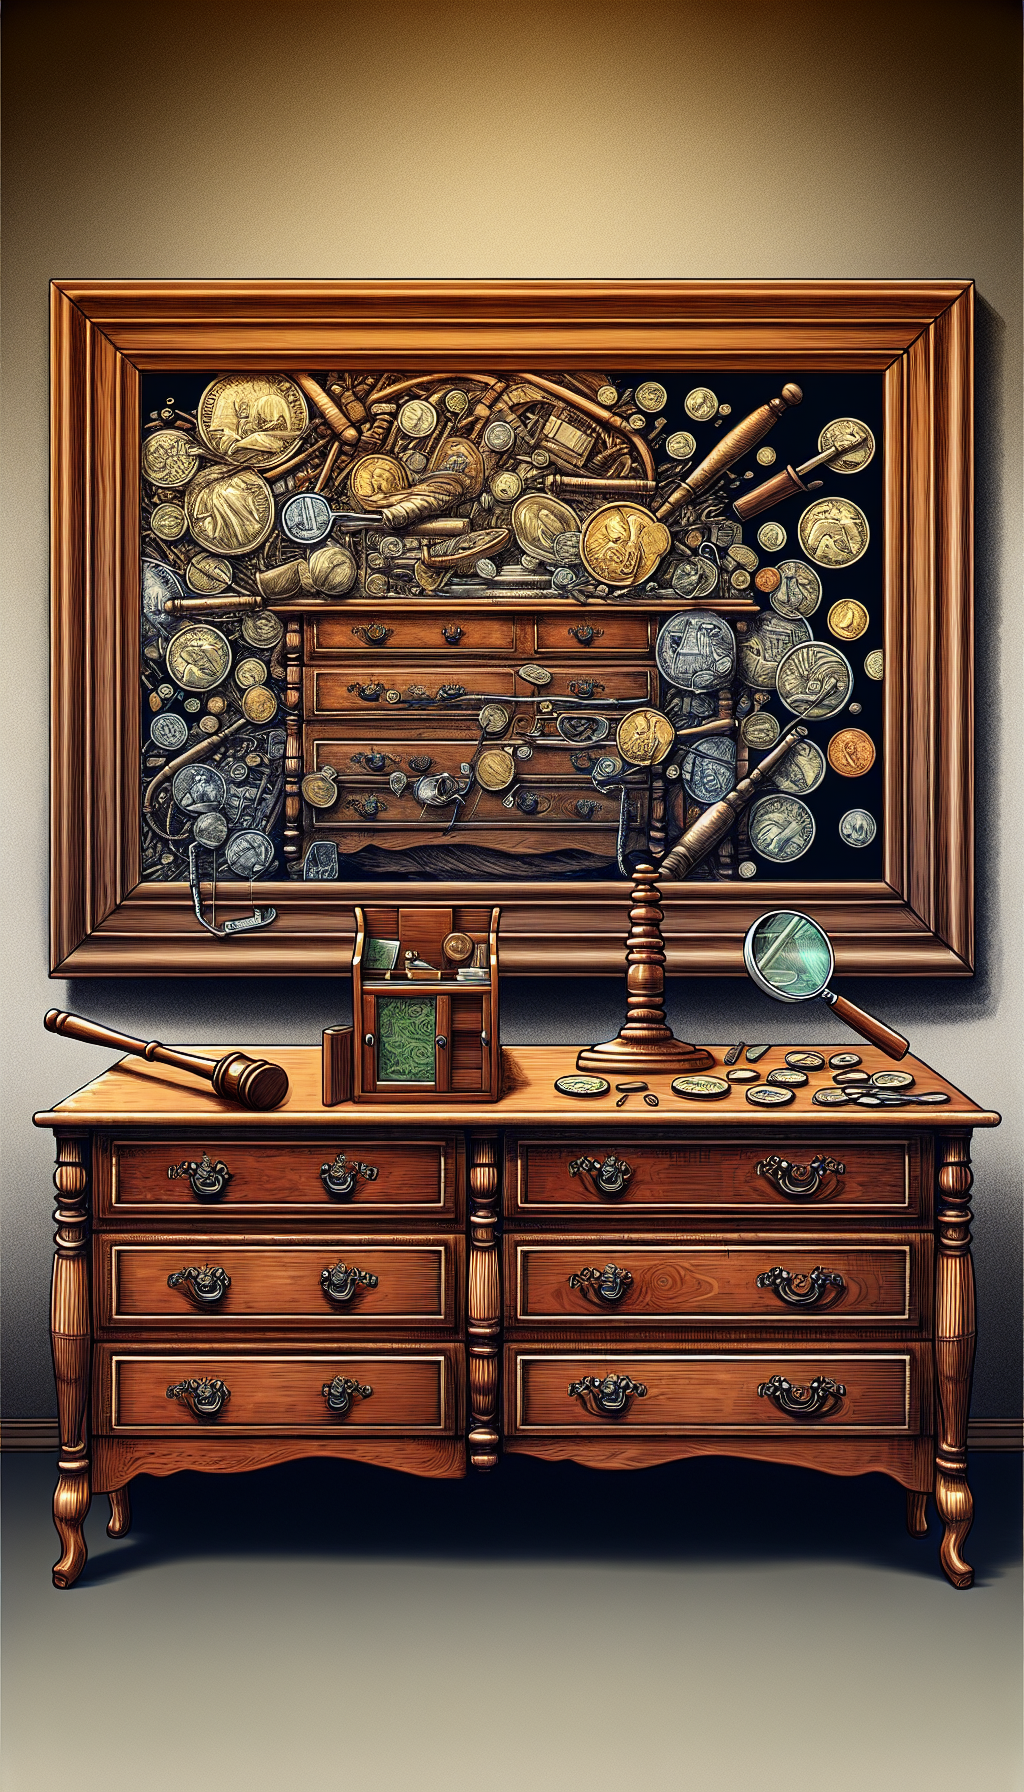 An ornate antique dresser stands against a wall, its mirror reflecting an auctioneer's gavel, a magnifying glass, and coins. The dresser appears vibrant where the reflection shows these factors influencing its value, transitioning from sketchy outlines to intricate detail and rich color within the mirror's pane, symbolizing the transformative impact of authenticity, condition, and provenance on its market worth.